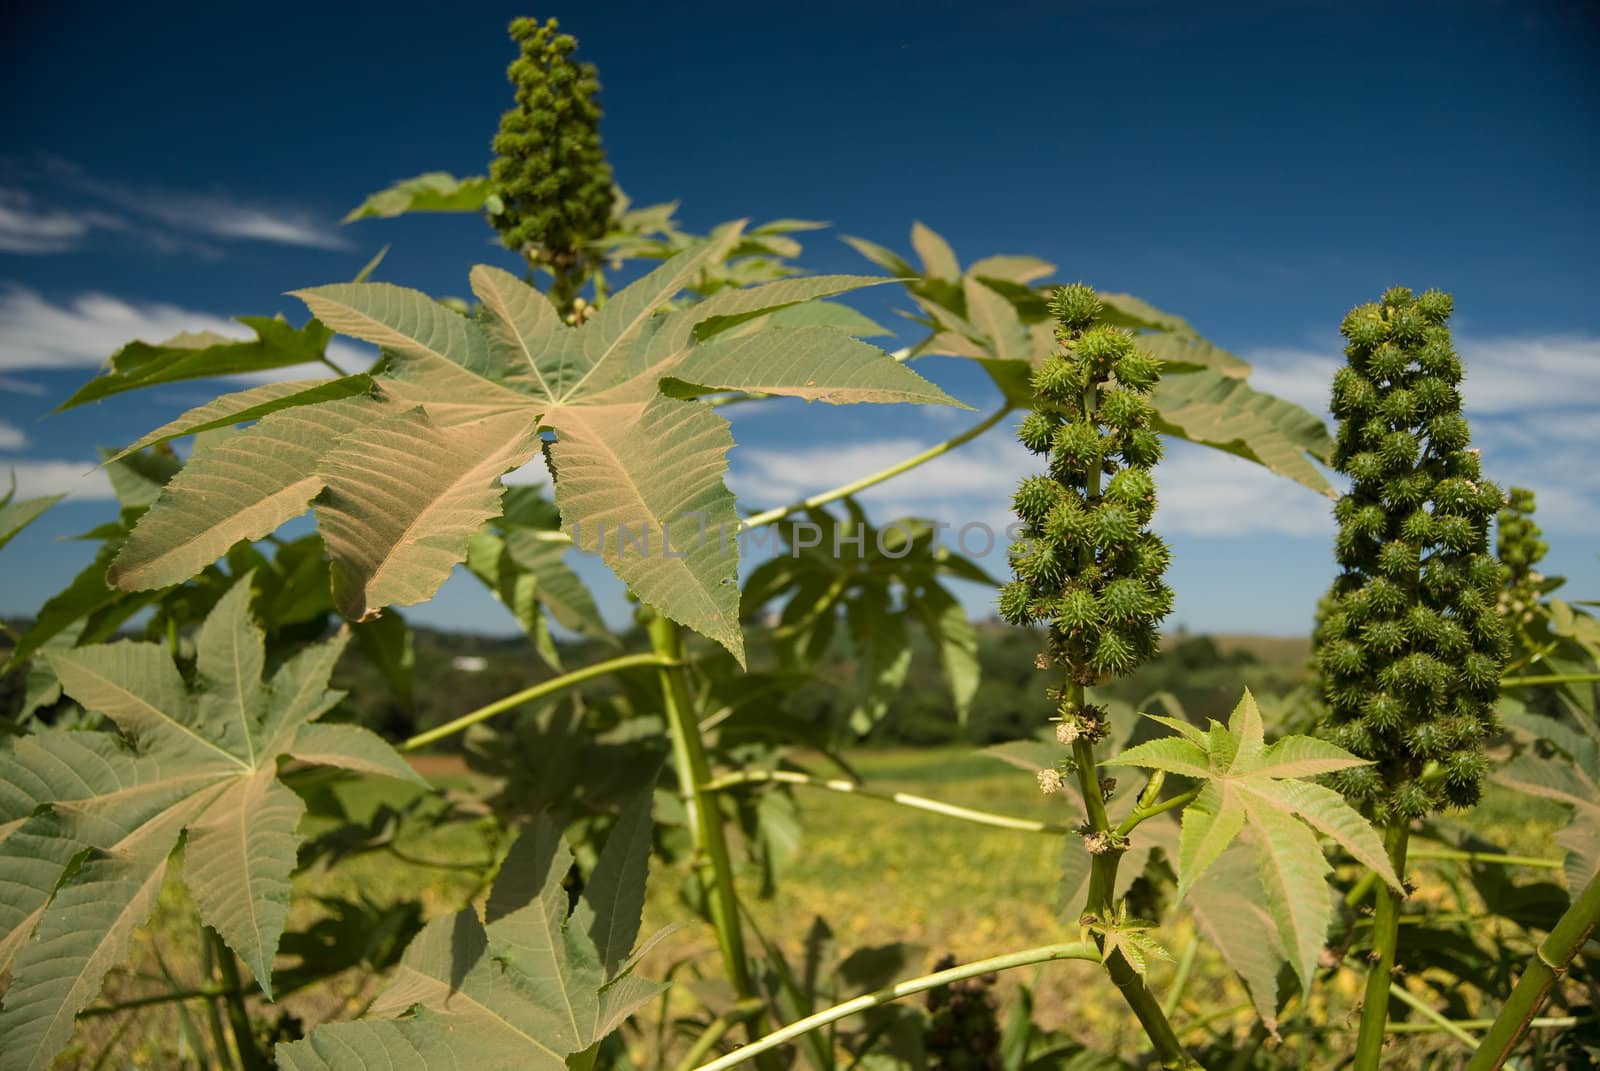 The oil of castor seed is one of raw materials used in the production of biofuel in Brazil.